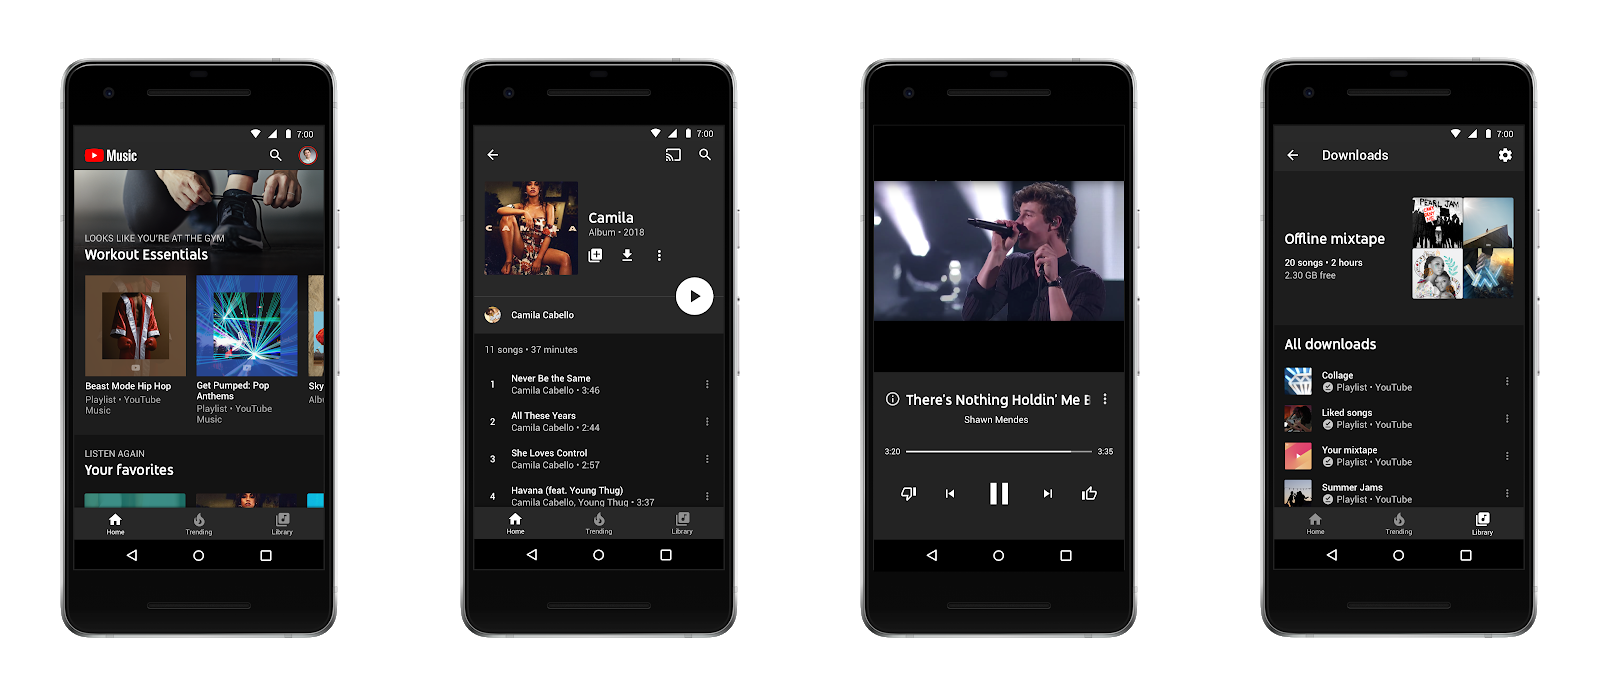 YouTube’s new music service is launching in under a week